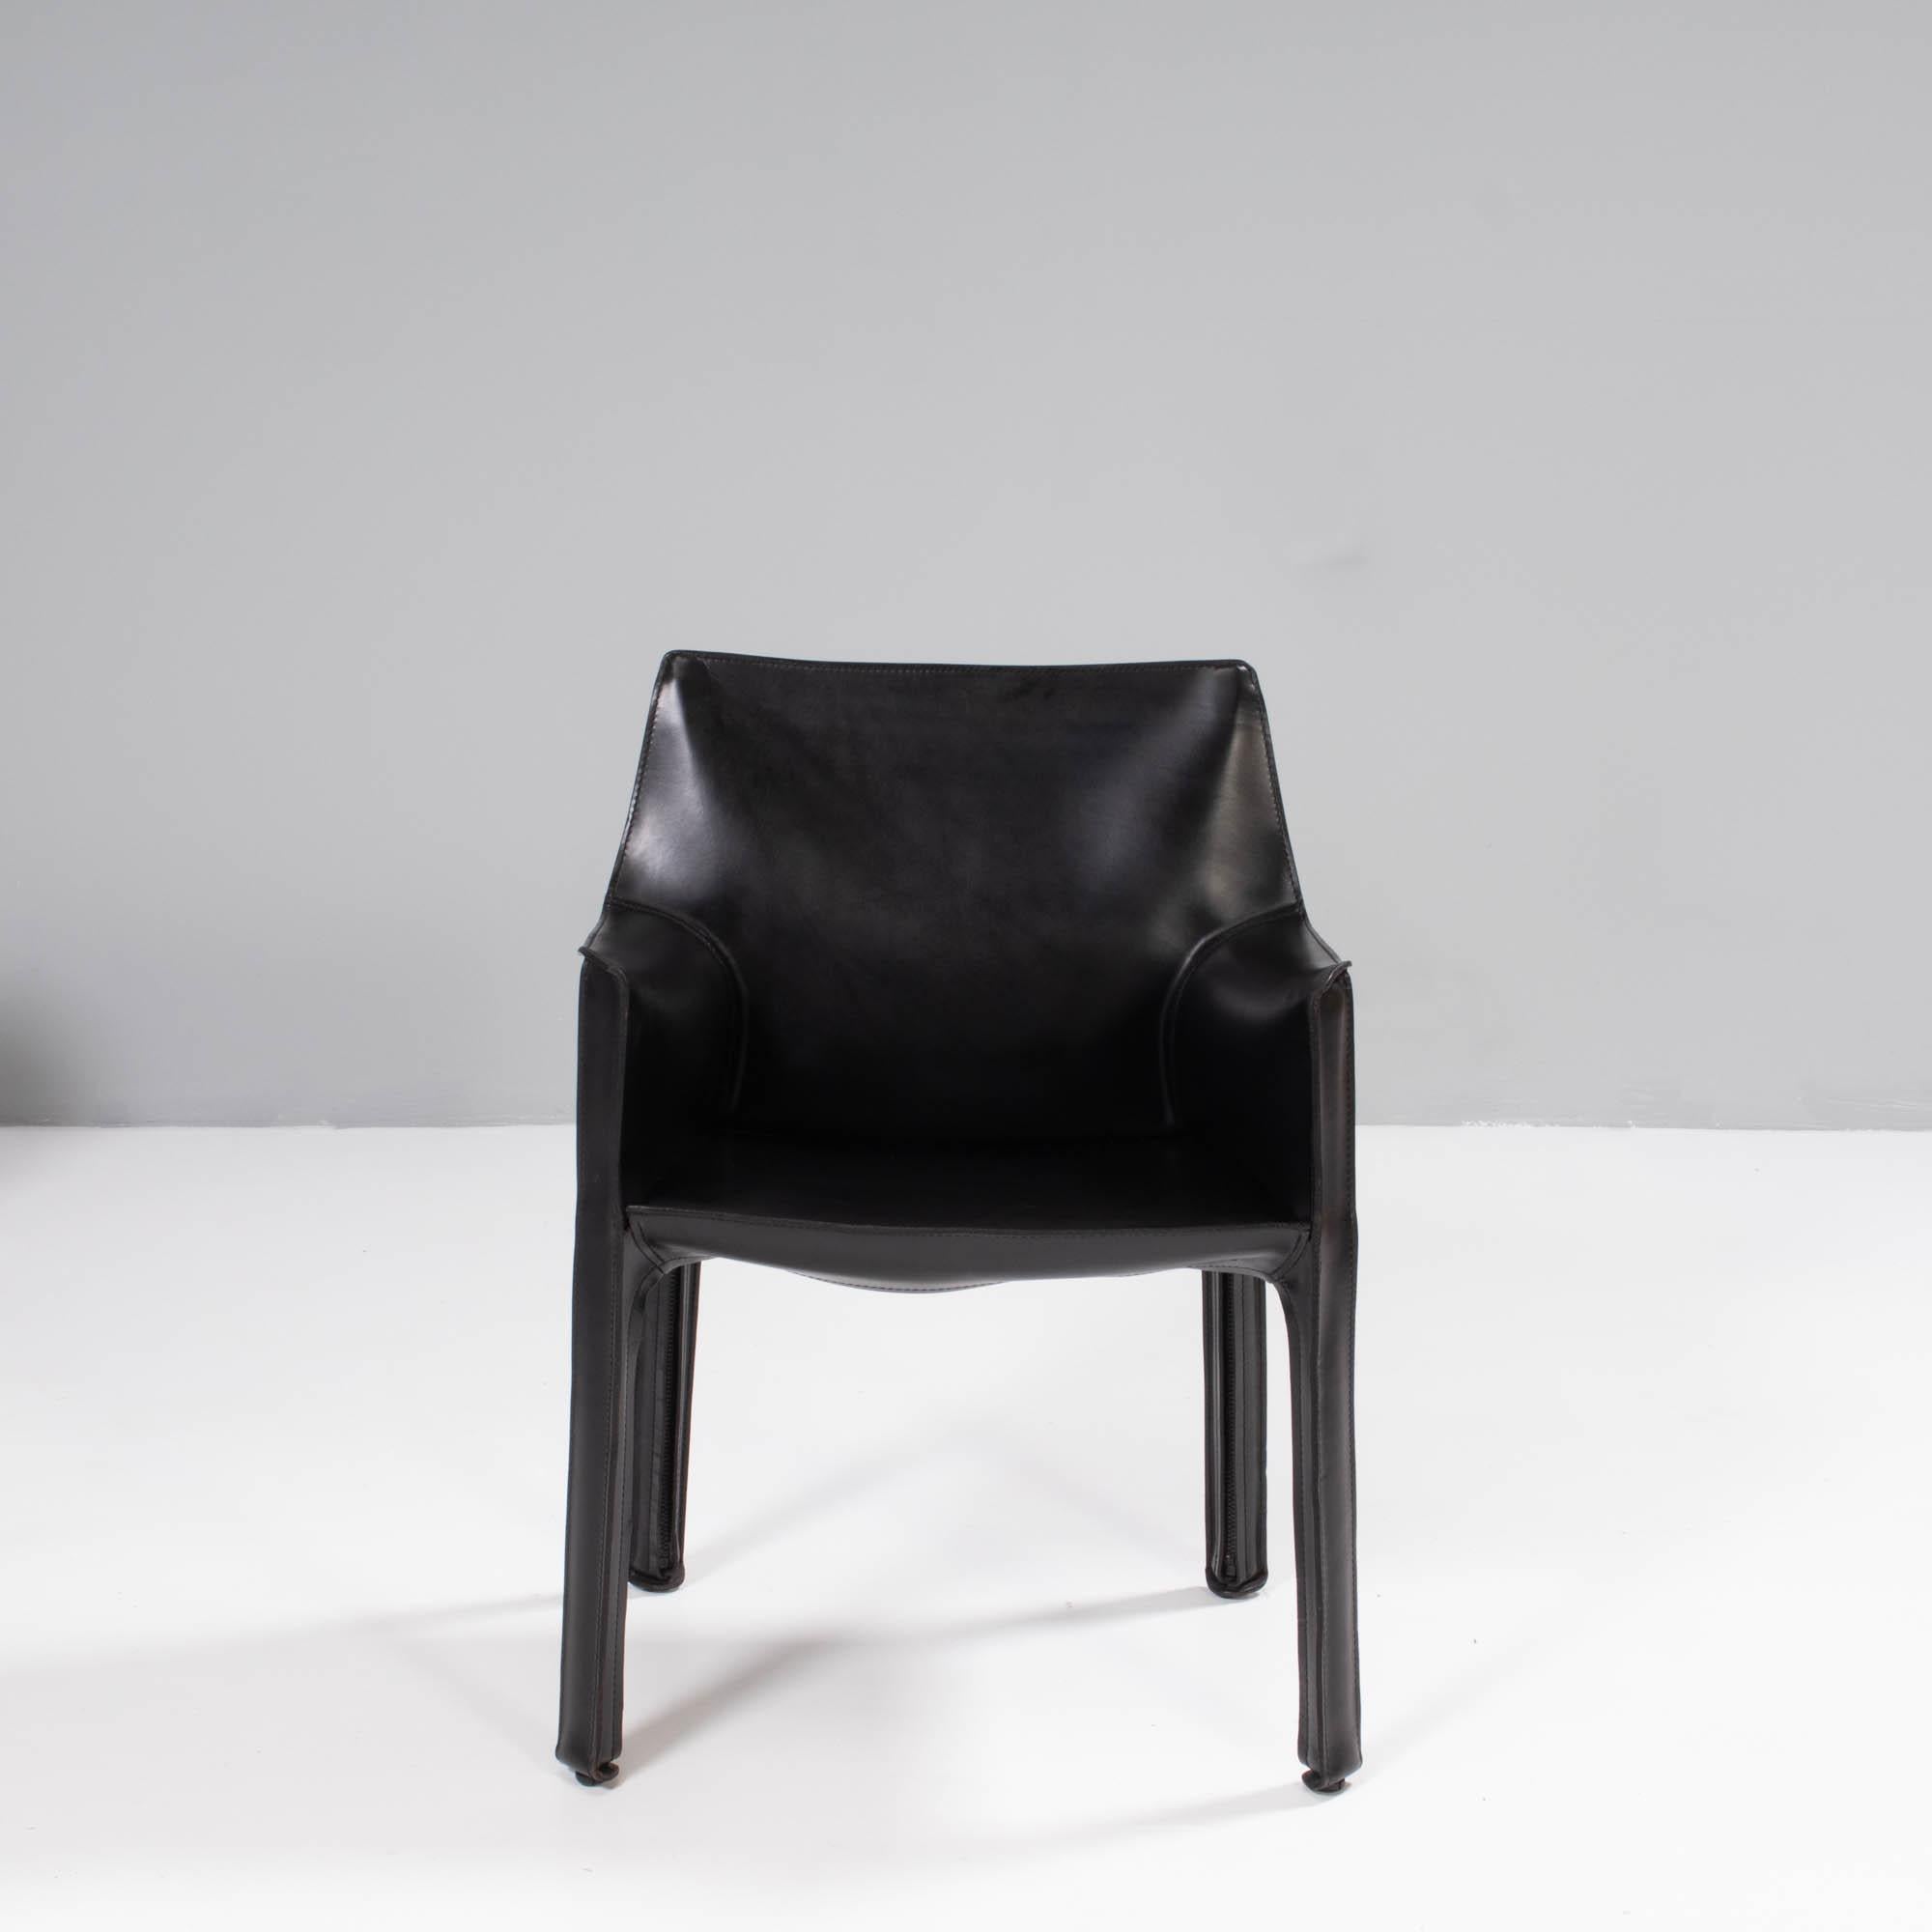 Cassina by Mario Bellini 'Cab' Black Leather Carver Dining Chairs 1